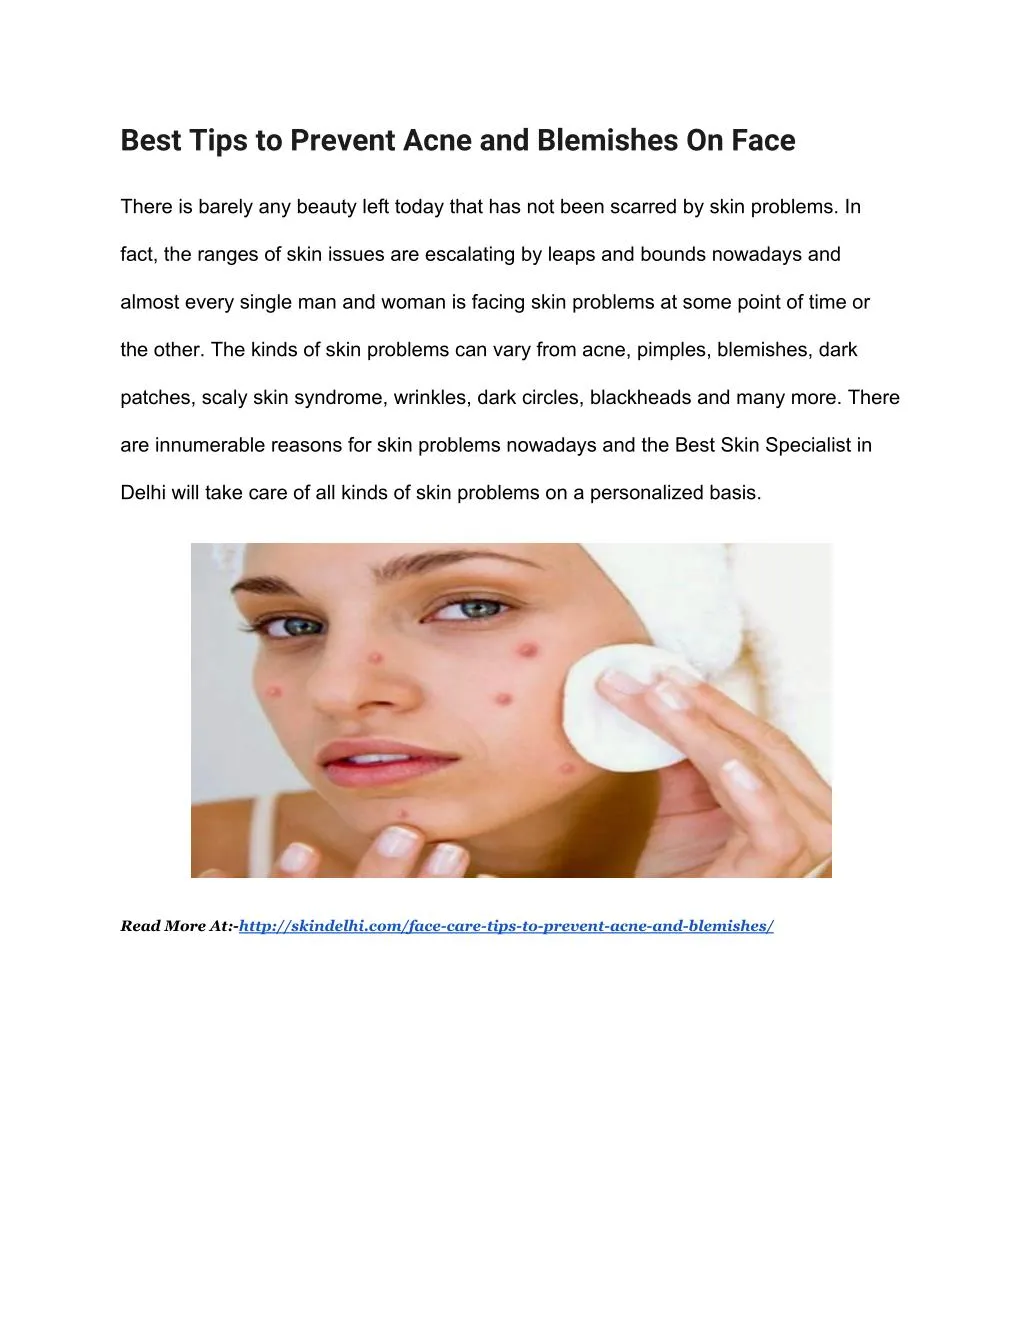 best tips to prevent acne and blemishes on face